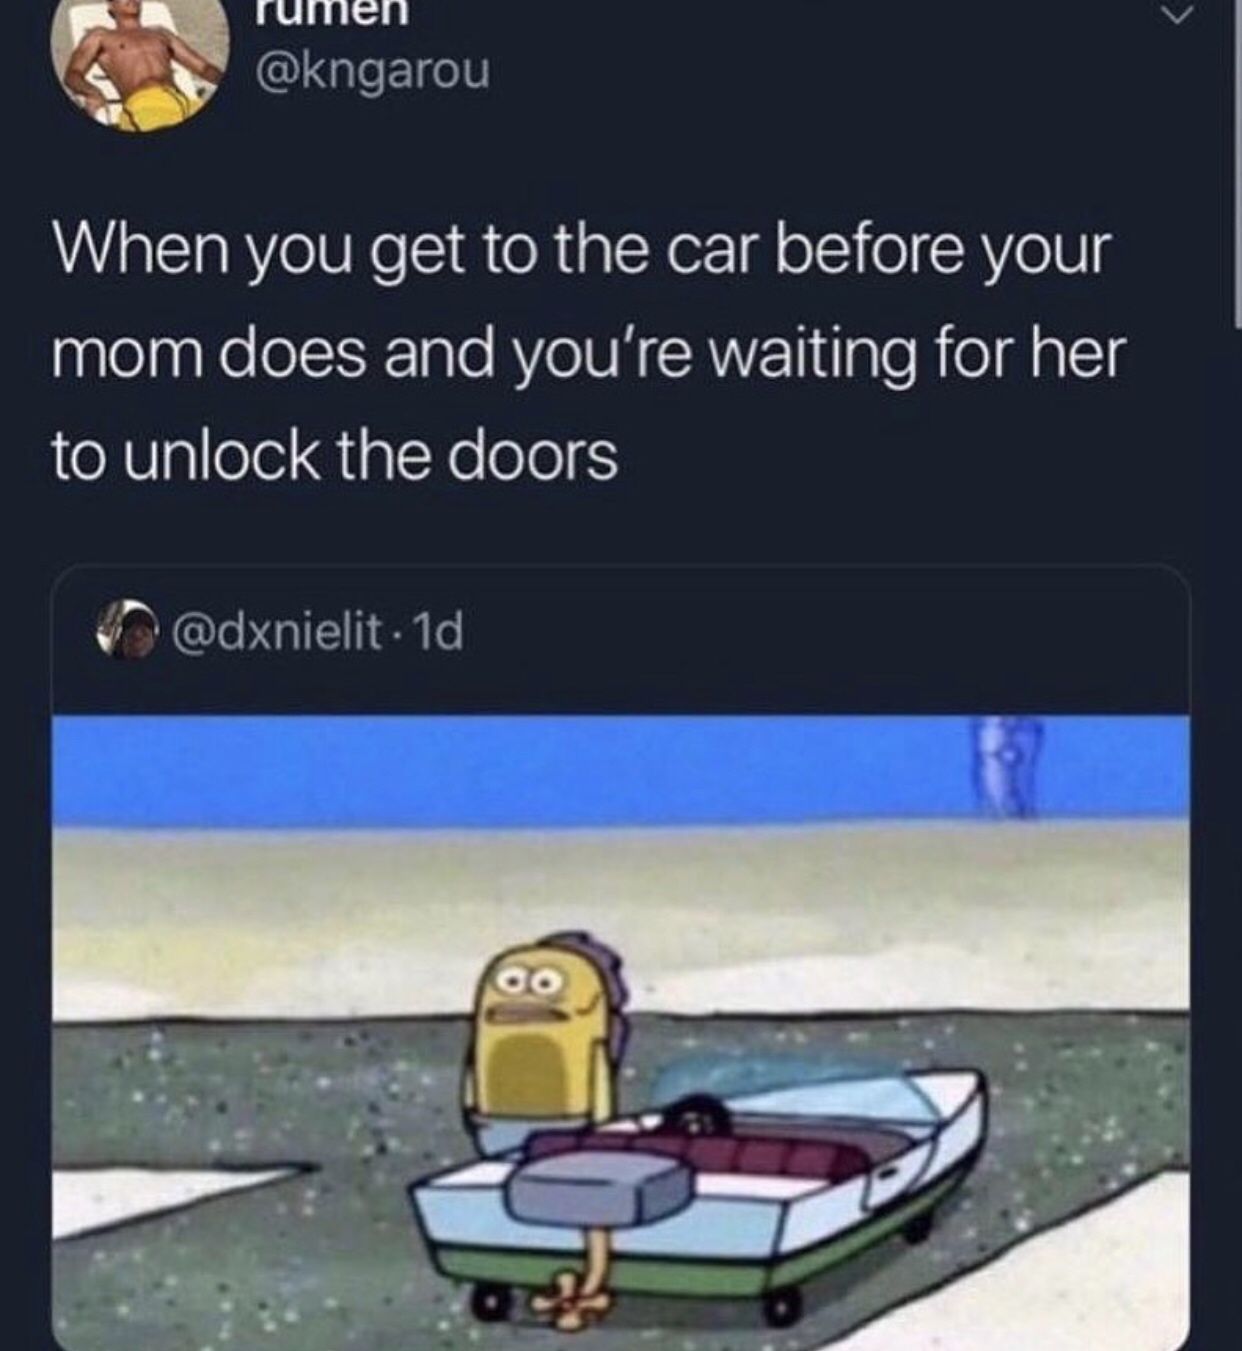 friday 13 - spongebob boat meme - rumen When you get to the car before your mom does and you're waiting for her to unlock the doors . 1d